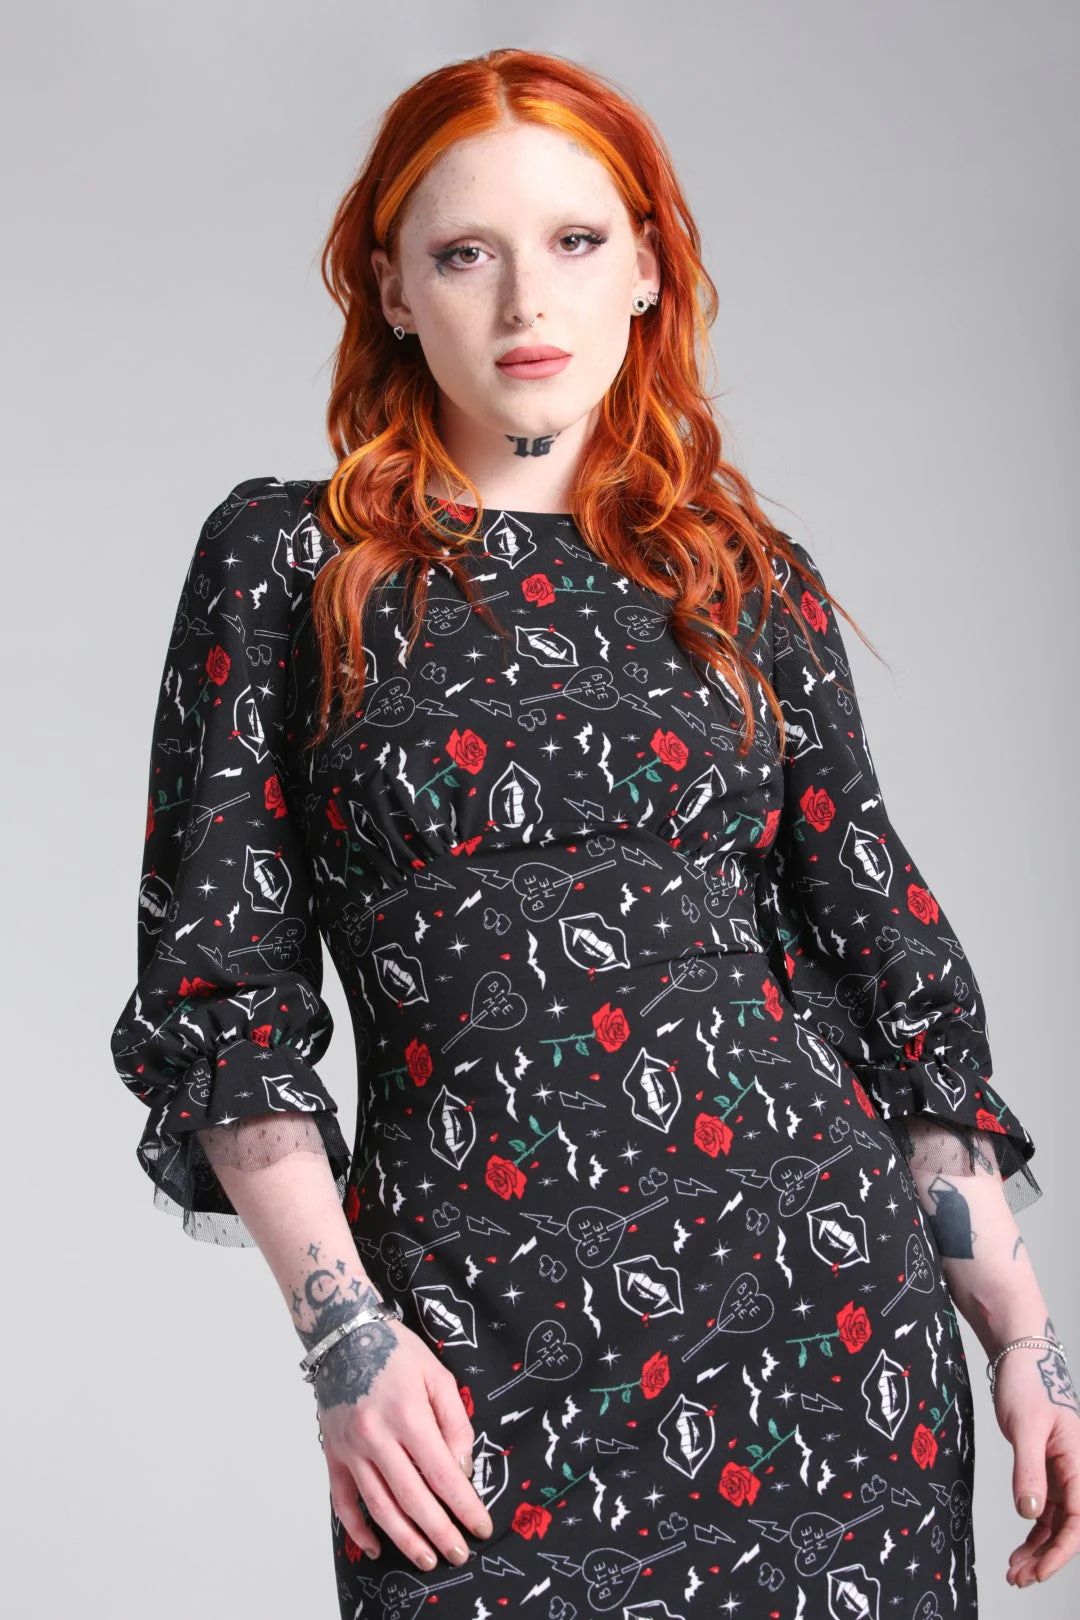 PS40373bbbbb-robe-gothique-rock-hell-bunny-lilith-maxi